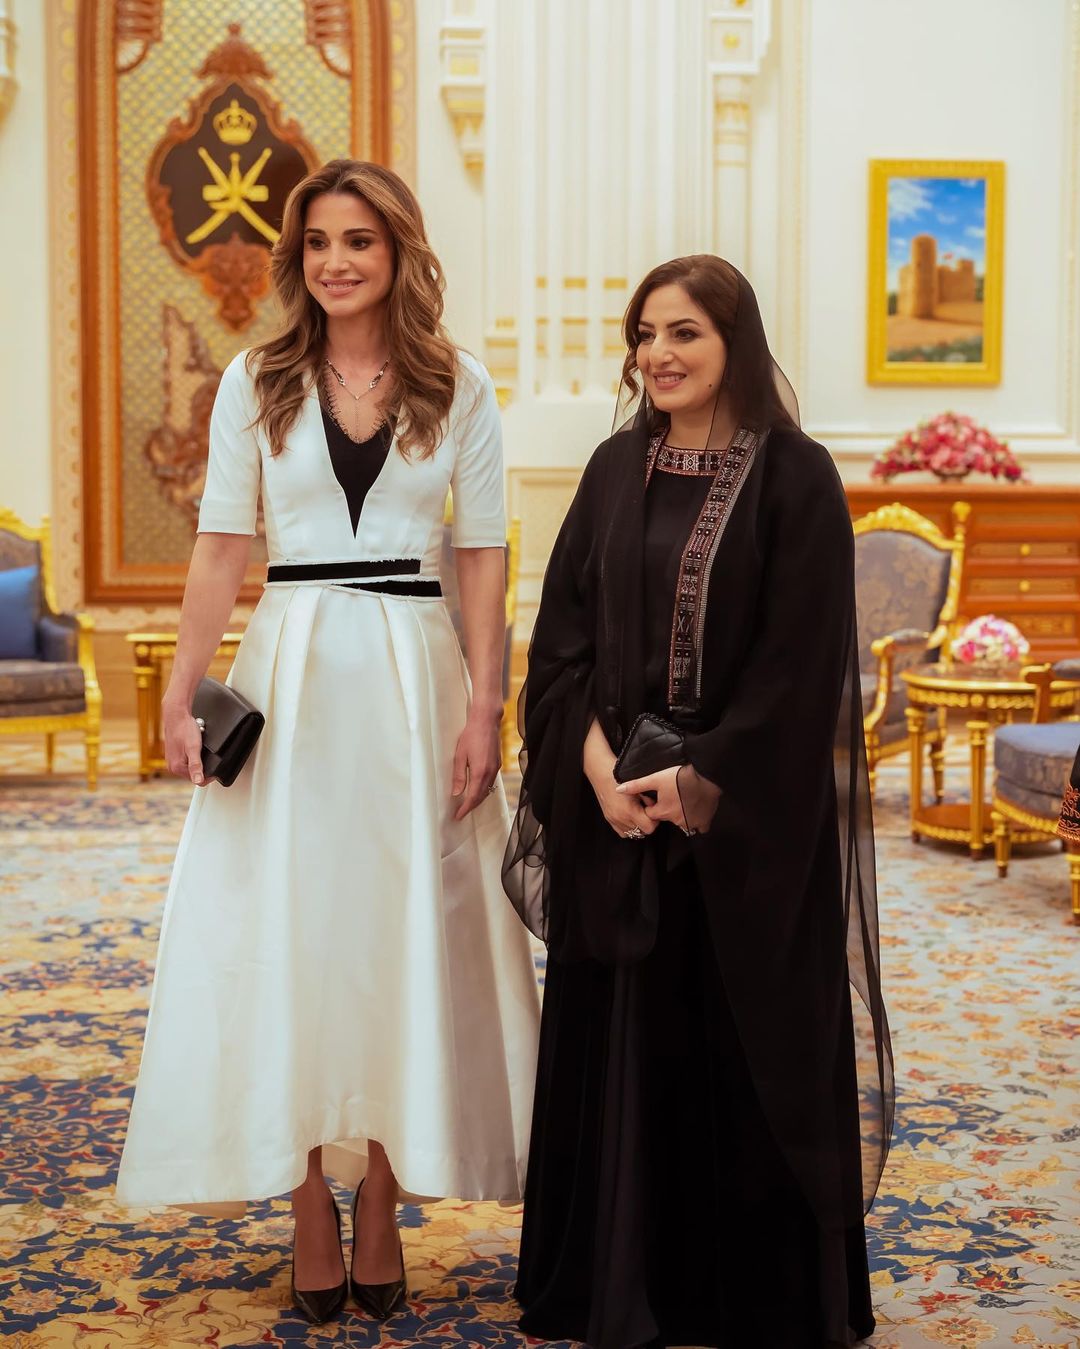 Queen Rania just finished her Oman visit